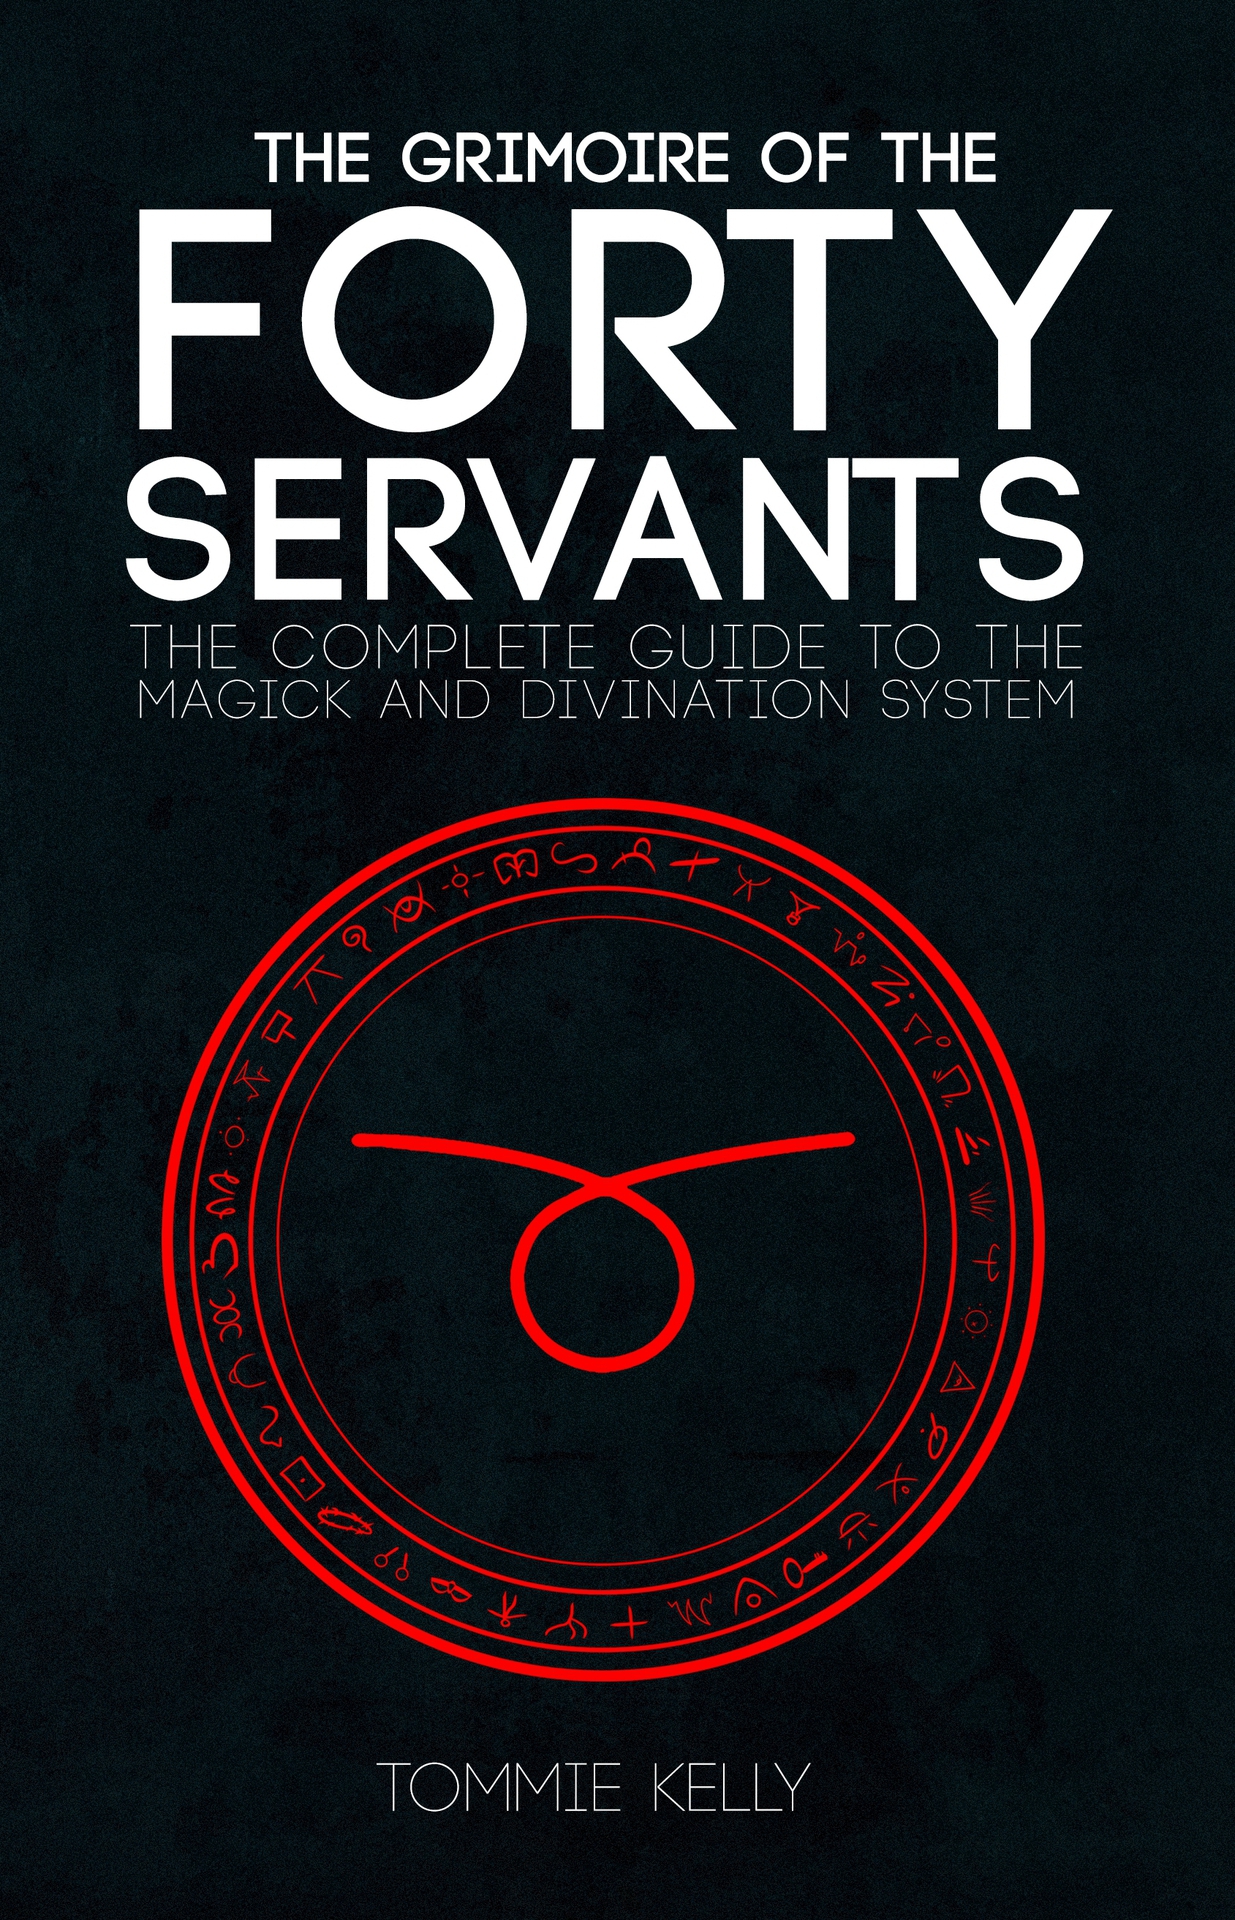 THE FORTY SERVANTS ARTWORK AND TEXT BY TOMMIE KELLY Copyright 2017 by Tommie - photo 1